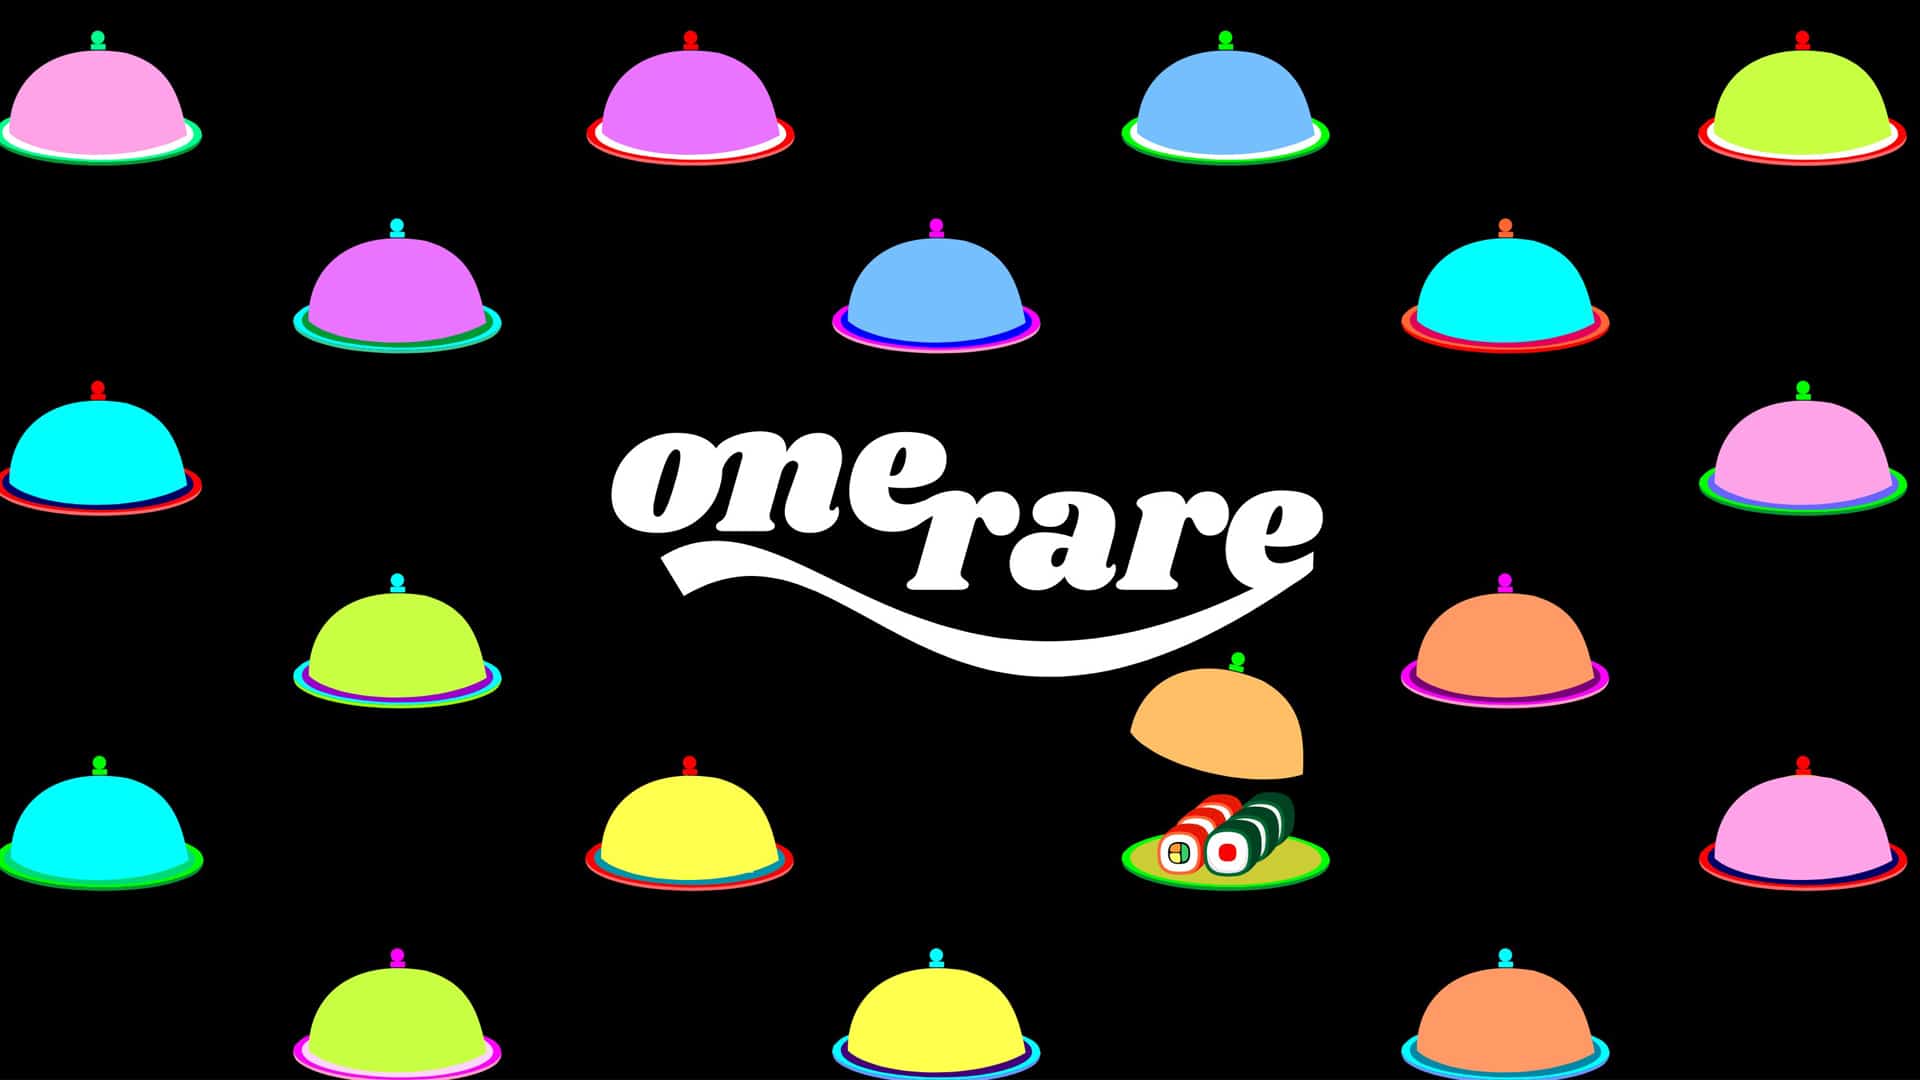 OneRare Review- The World’s First Foodverse